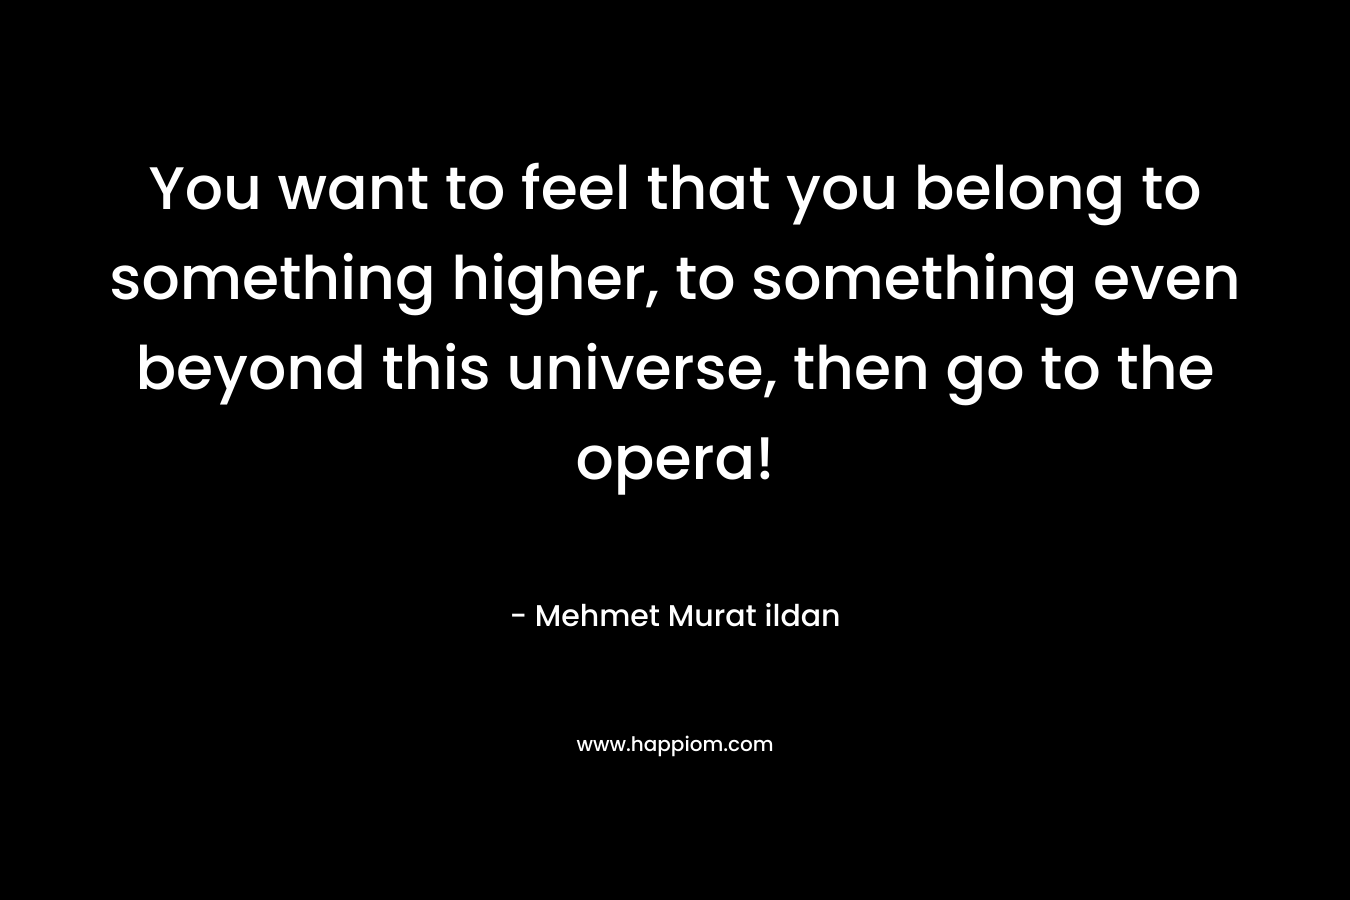 You want to feel that you belong to something higher, to something even beyond this universe, then go to the opera!